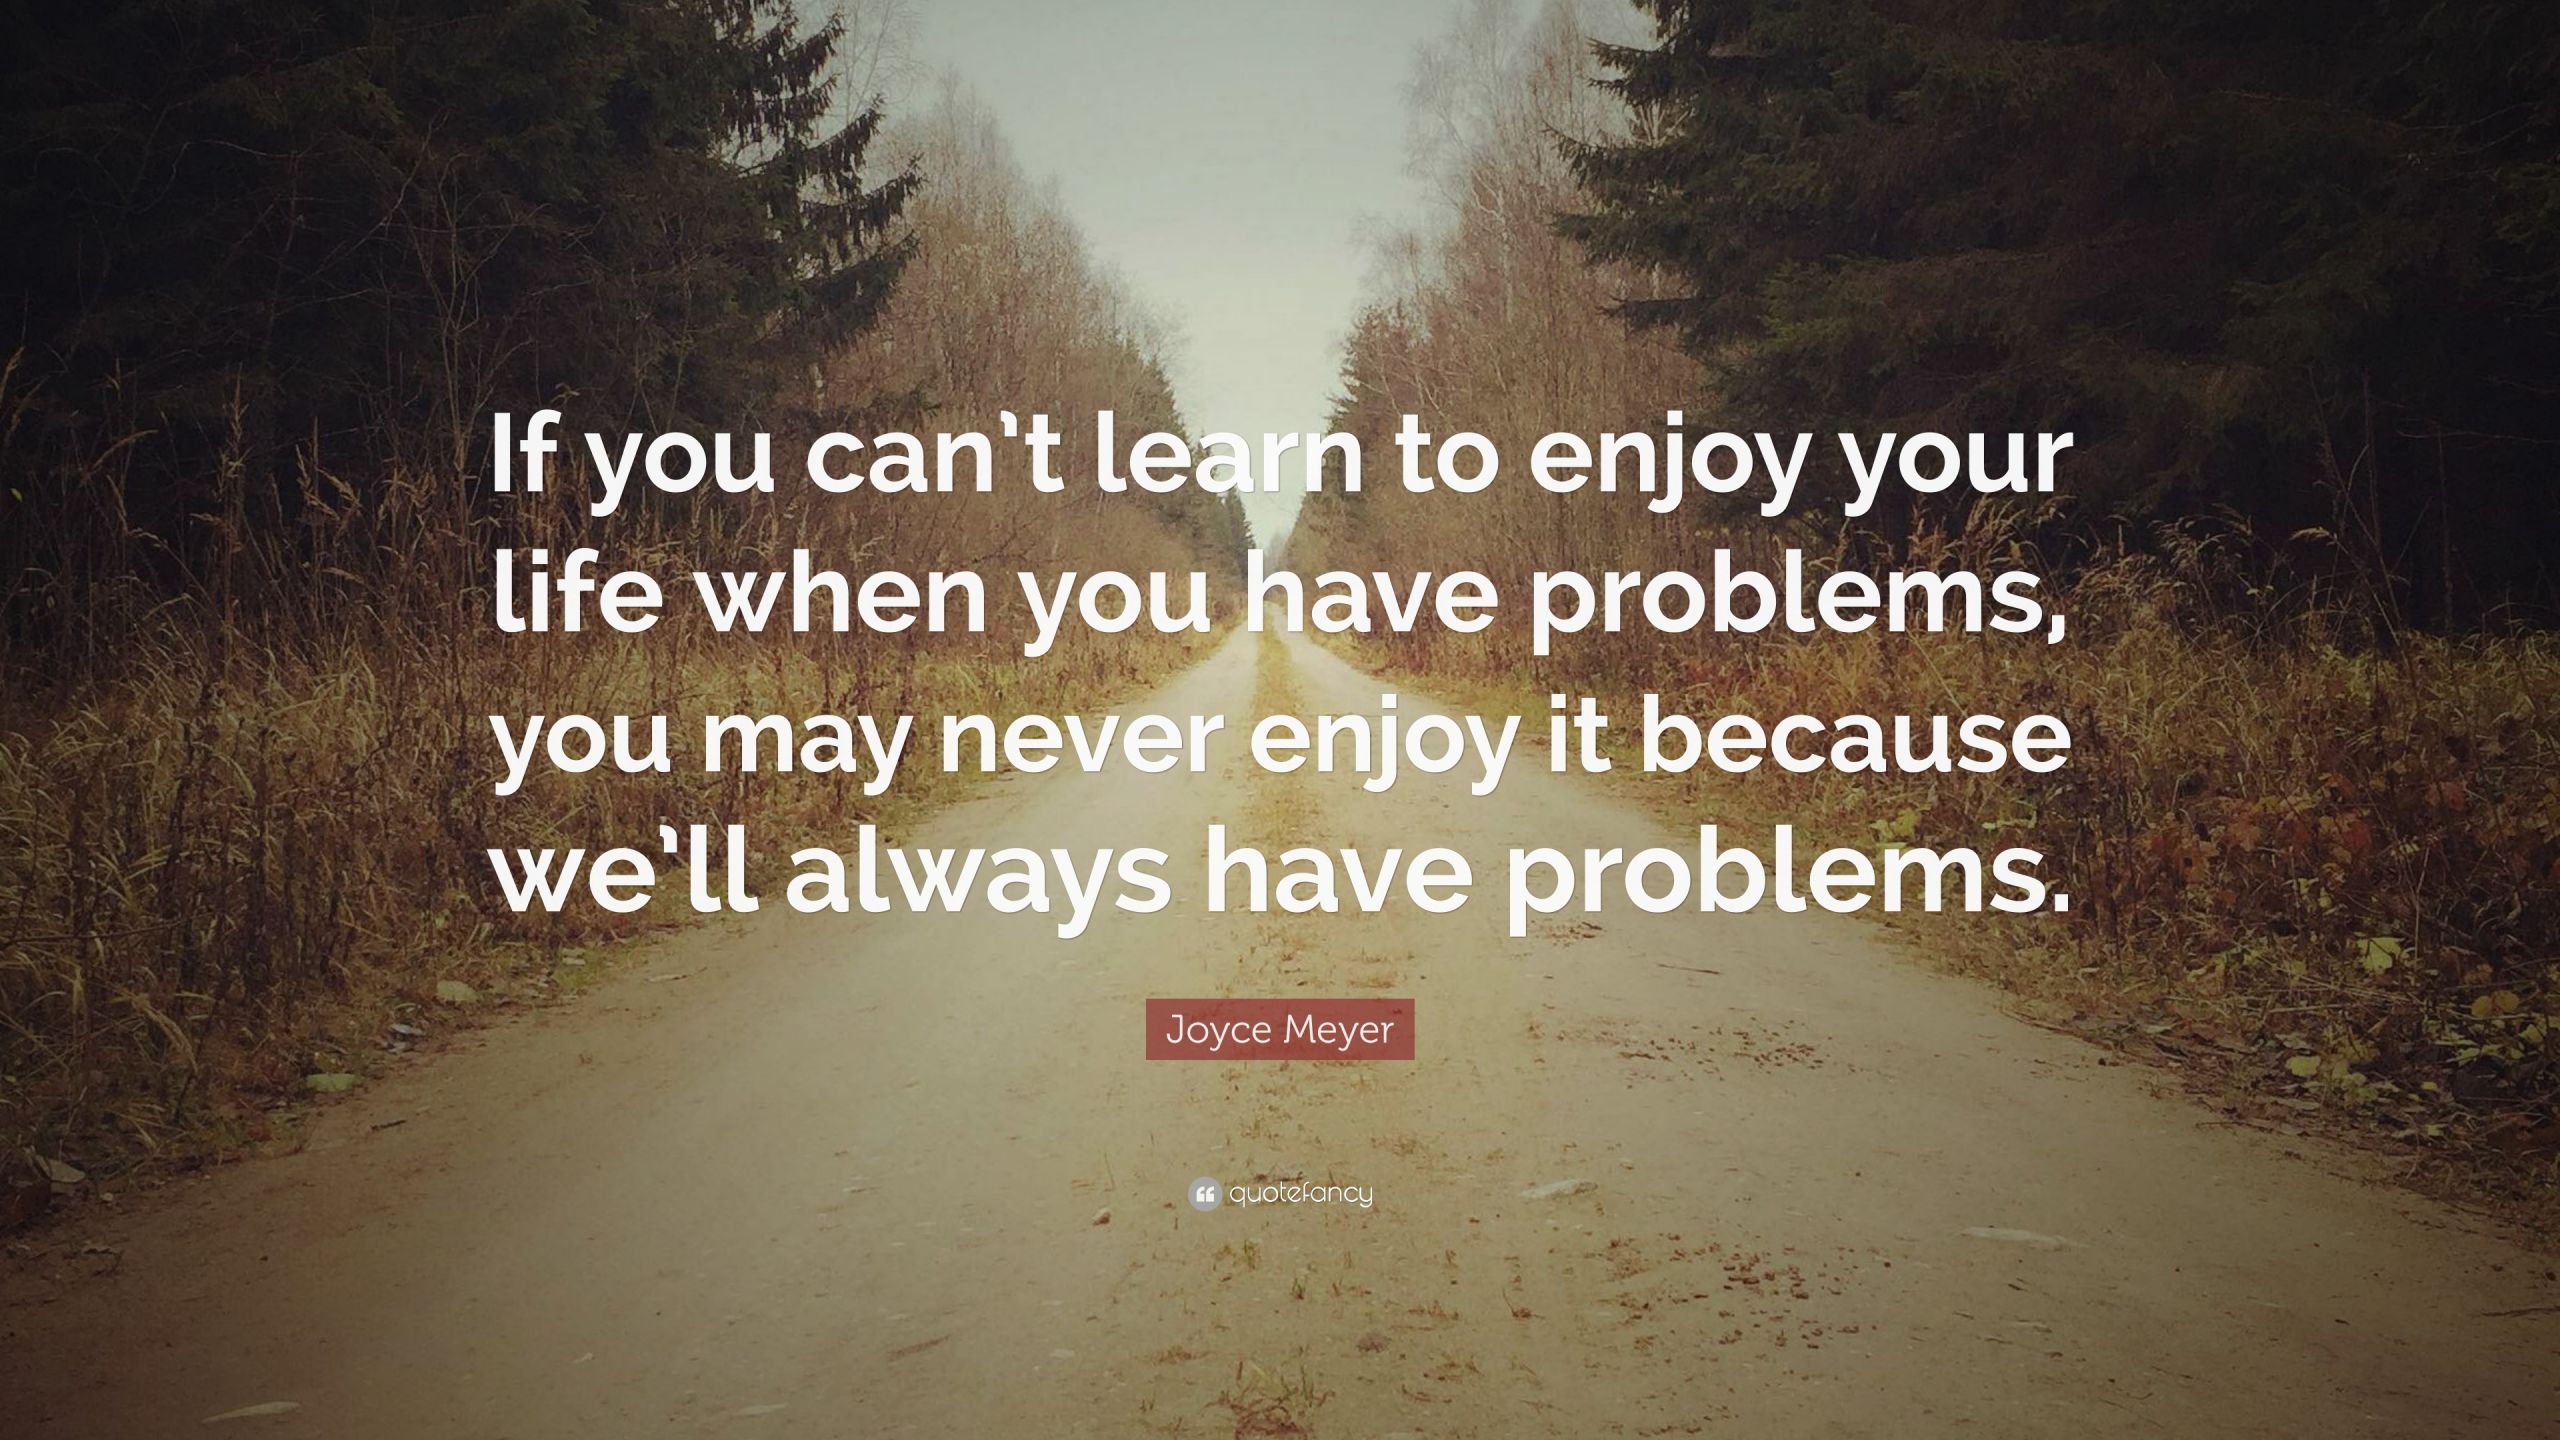 Enjoy Your Life Quote
 Joyce Meyer Quote “If you can’t learn to enjoy your life